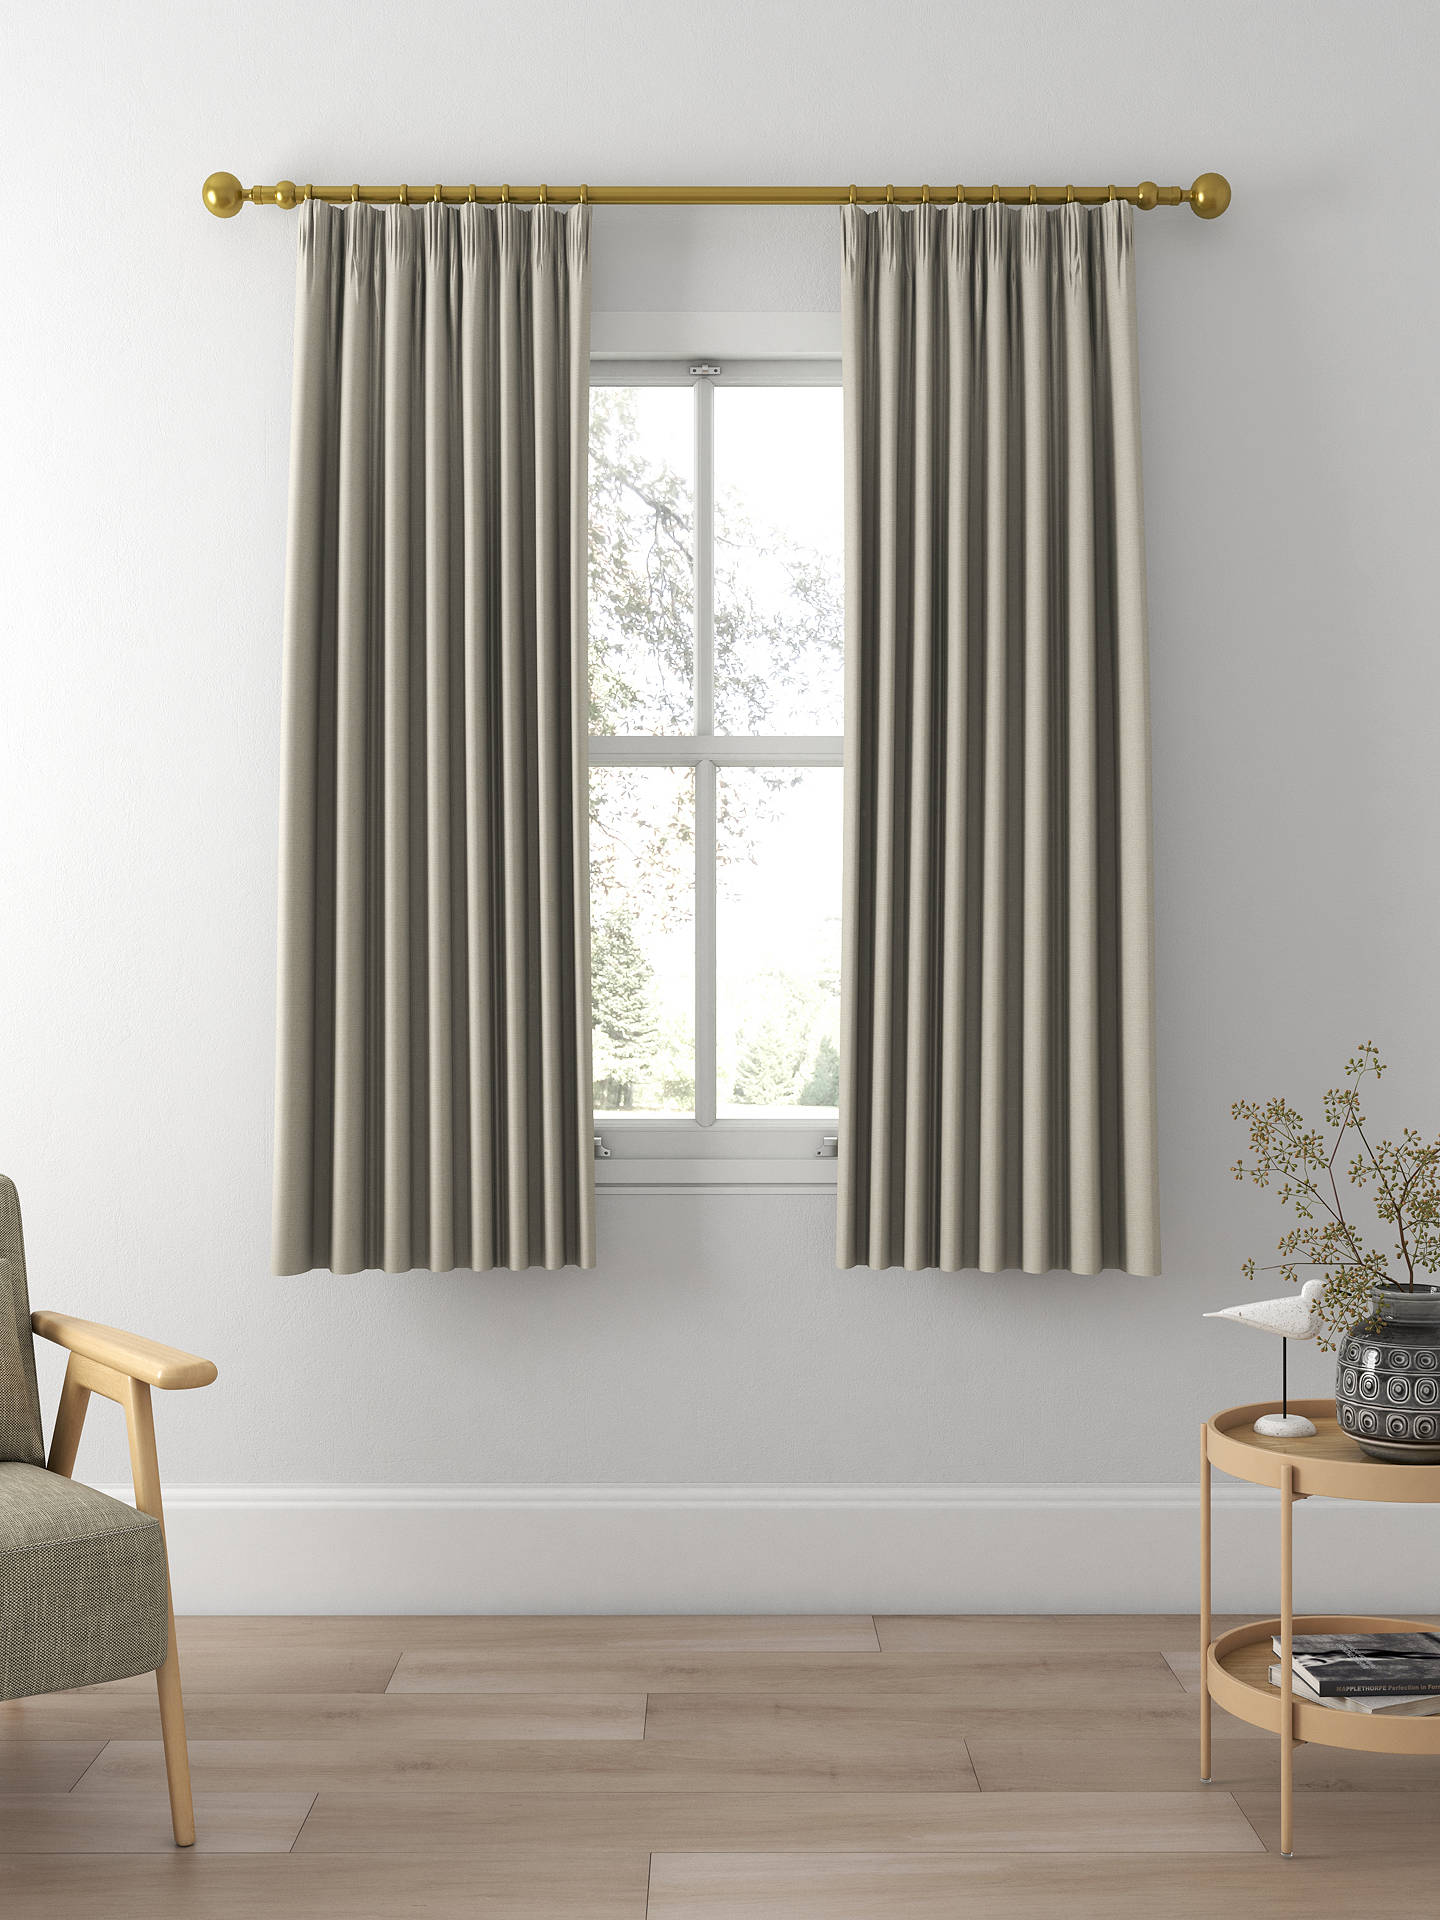 Sanderson Tuscany II Made to Measure Curtains, Linen